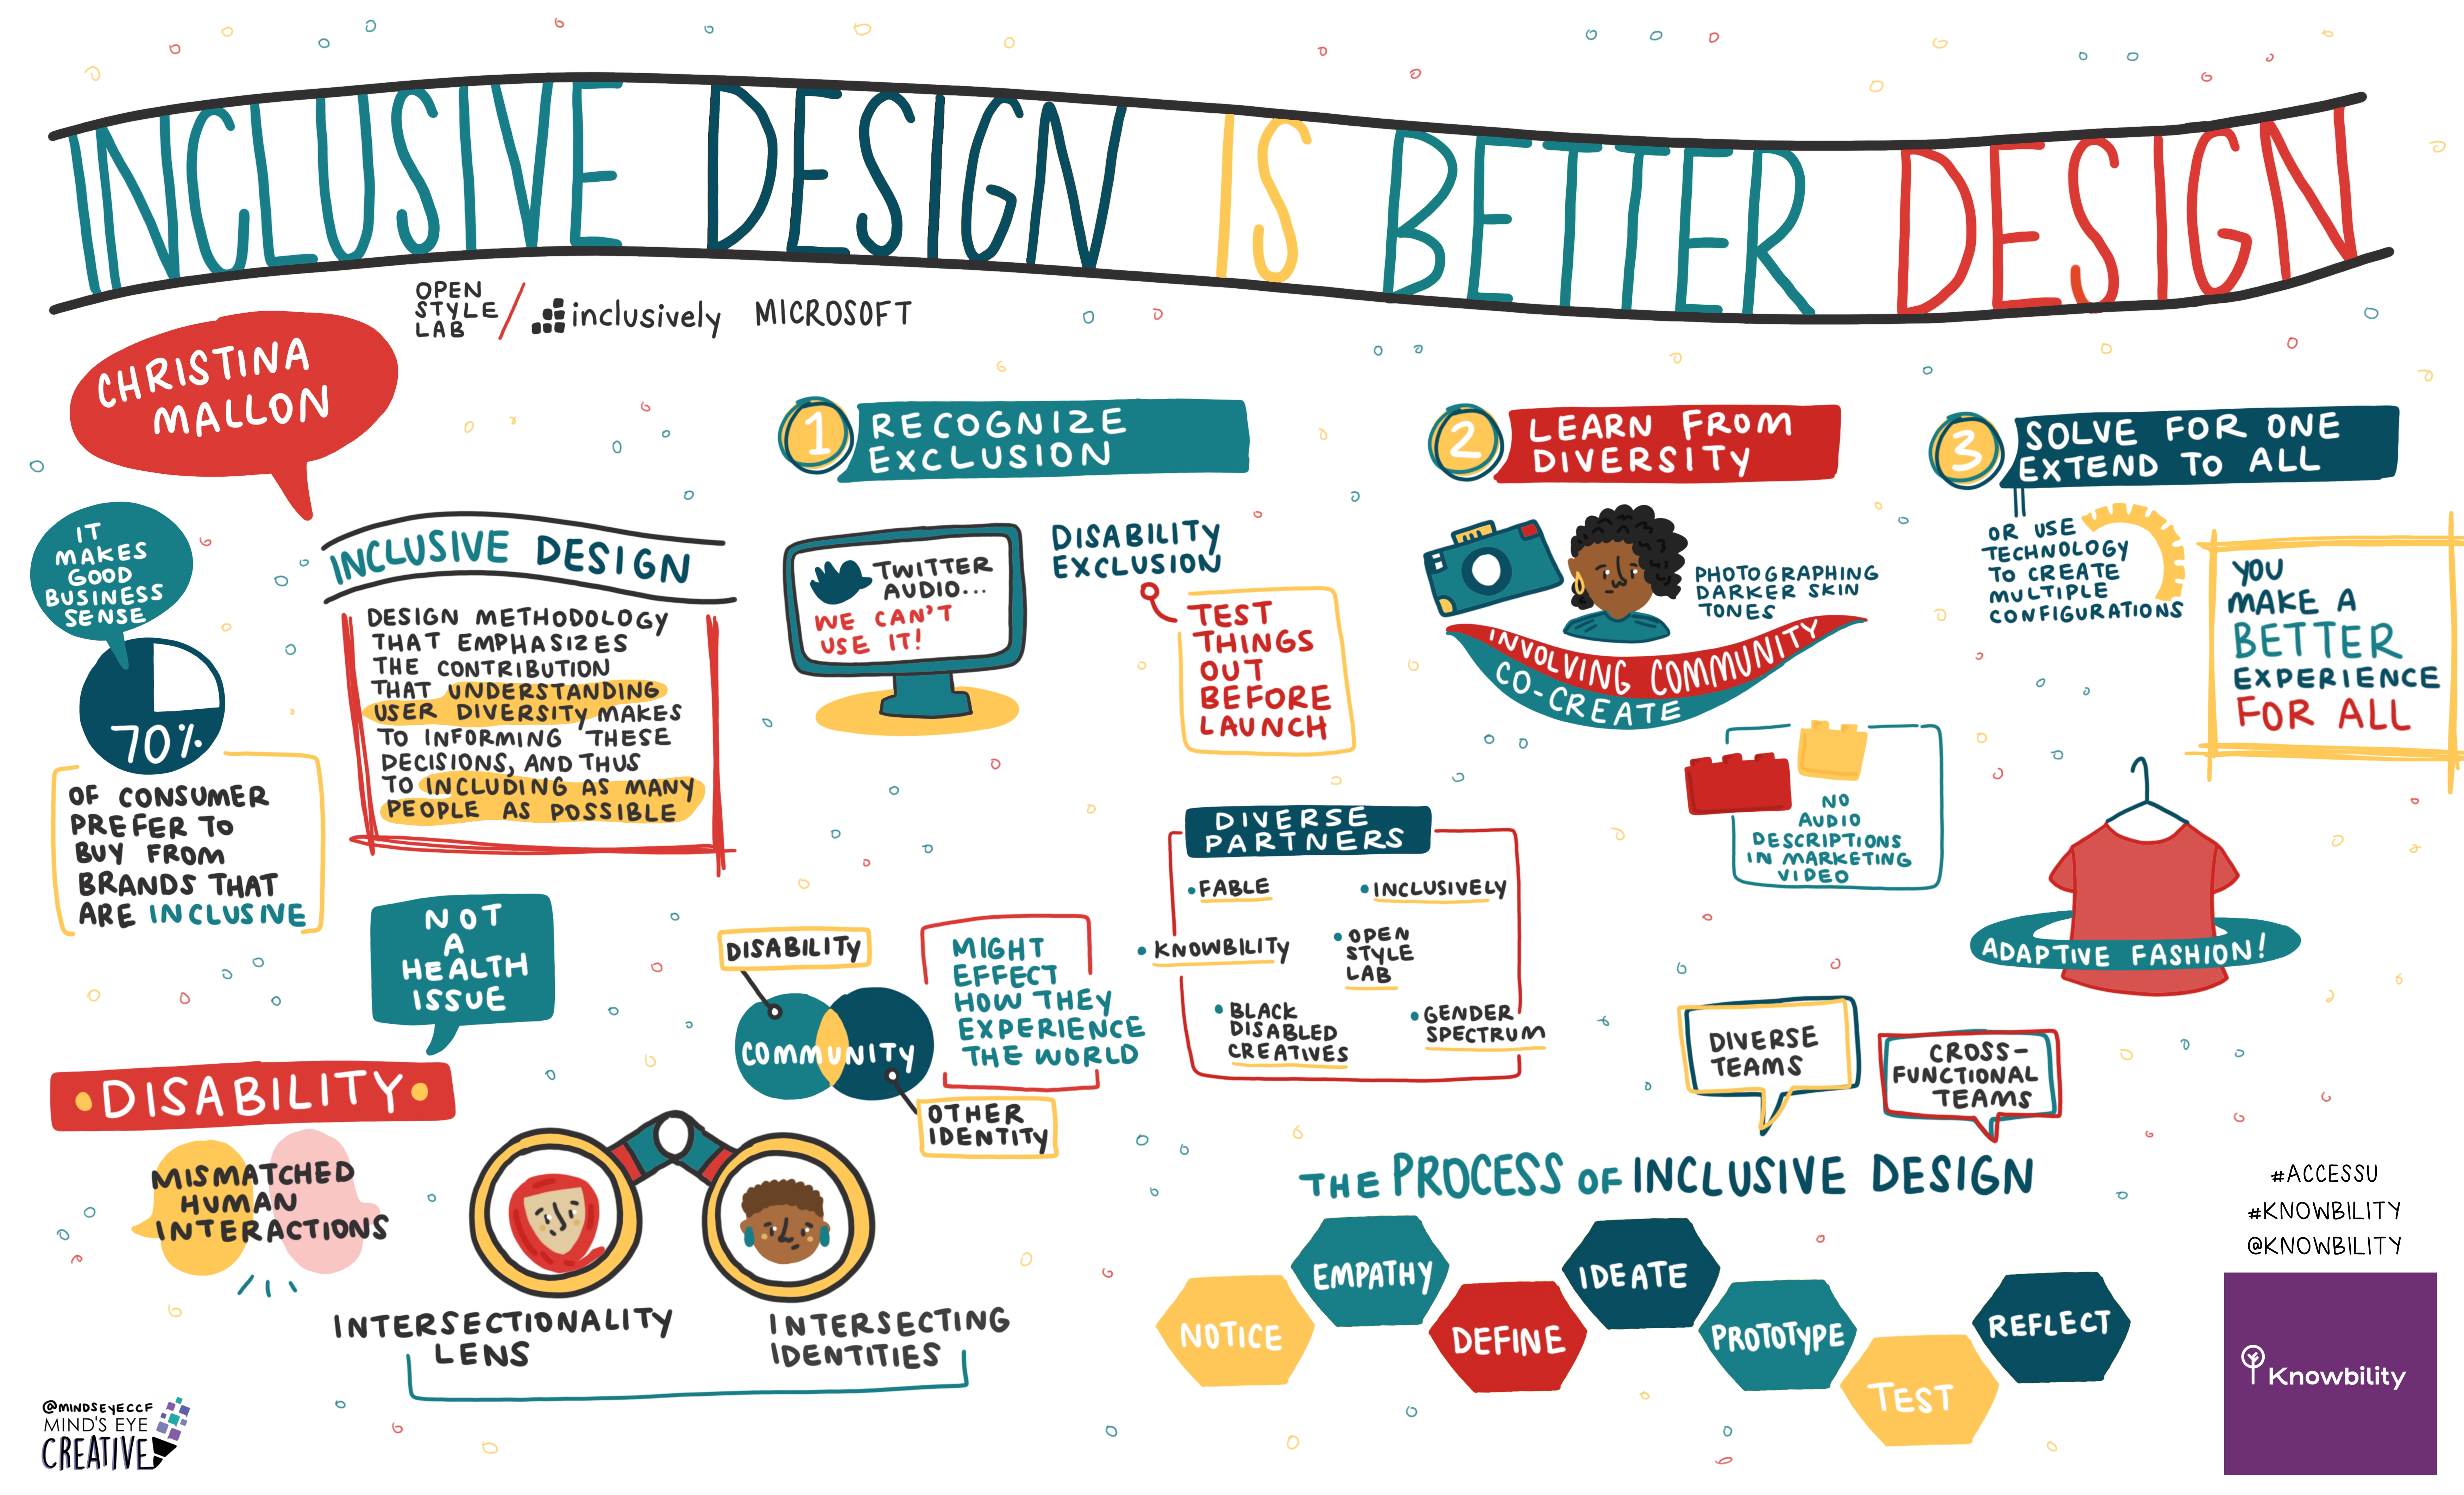 Sketchbook of presentation titled, “Inclusive Design is Better Design,” by Christina Mallon at the AccessU event.